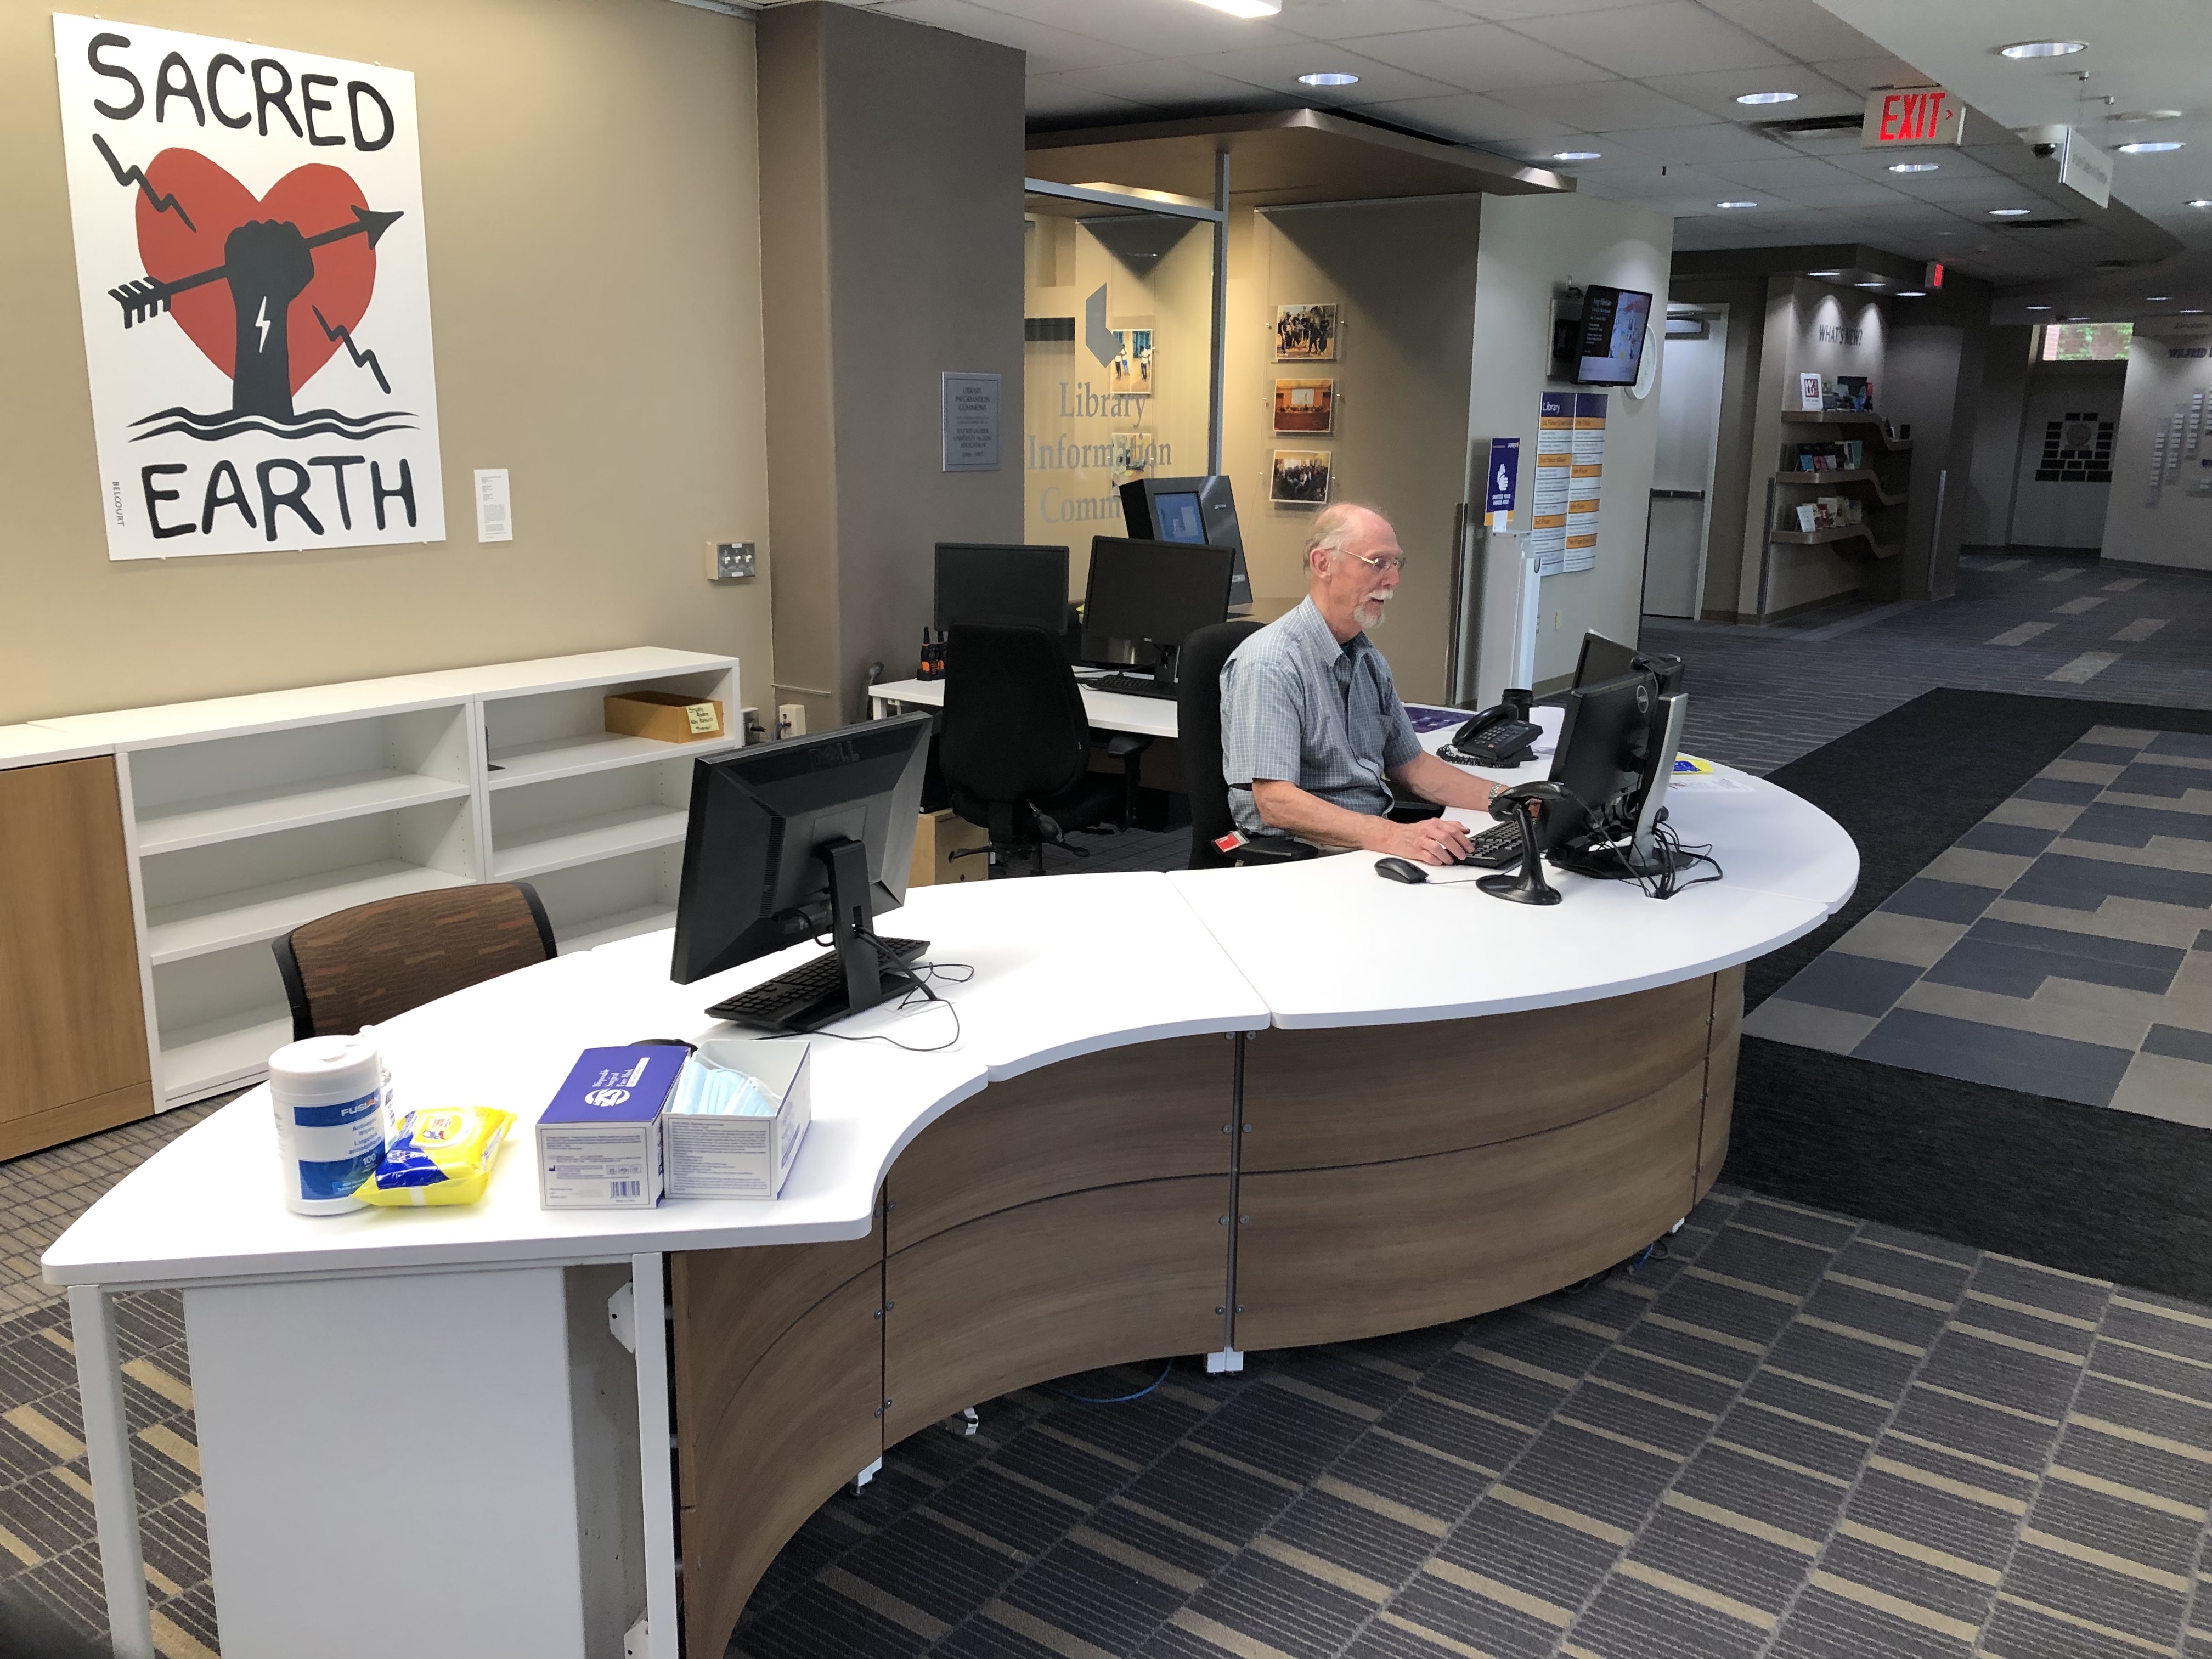 The user services desk, staffed with a library employee. The desk is large and curvy. On the wall is art “Sacred Earth” with hand holding arrow over a heart.